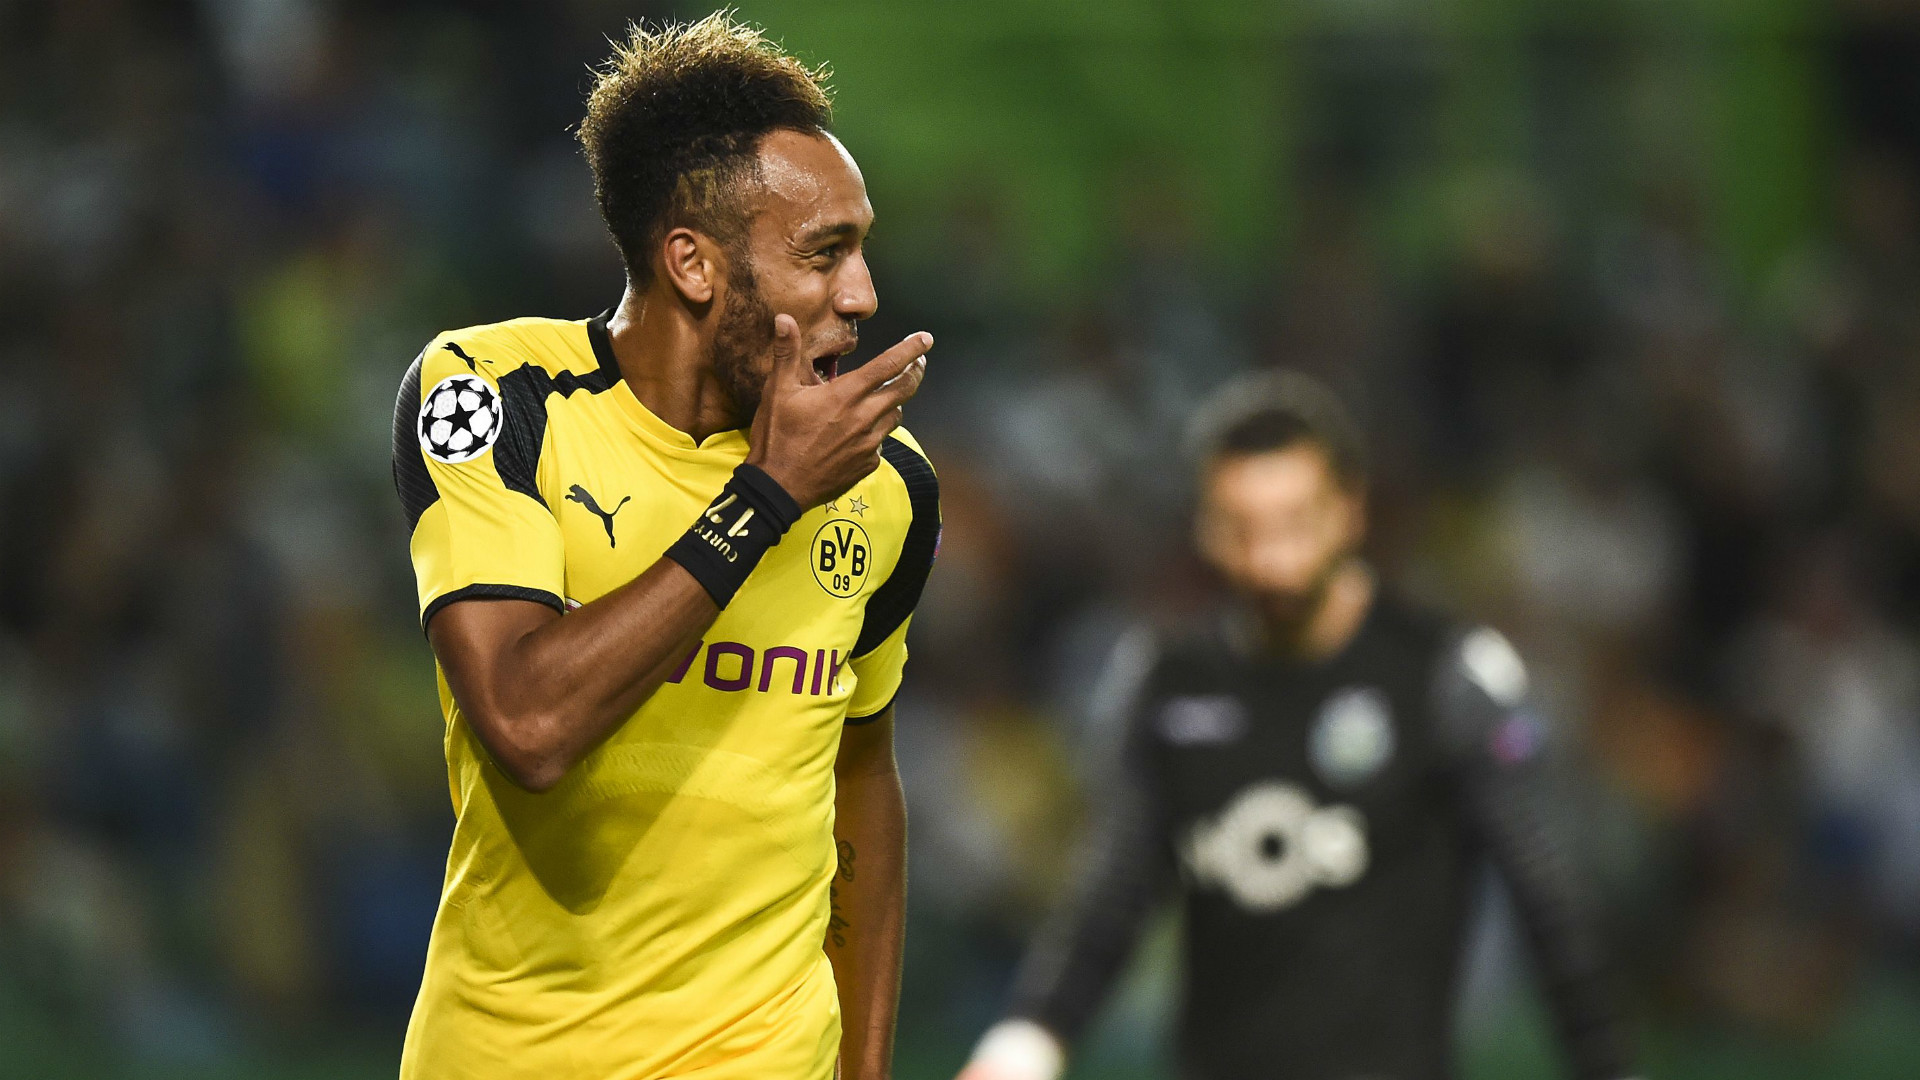 1920x1080 Chelsea-linked Pierre-Emerick Aubameyang reveals Borussia Dortmund wanted  to sell him this summer